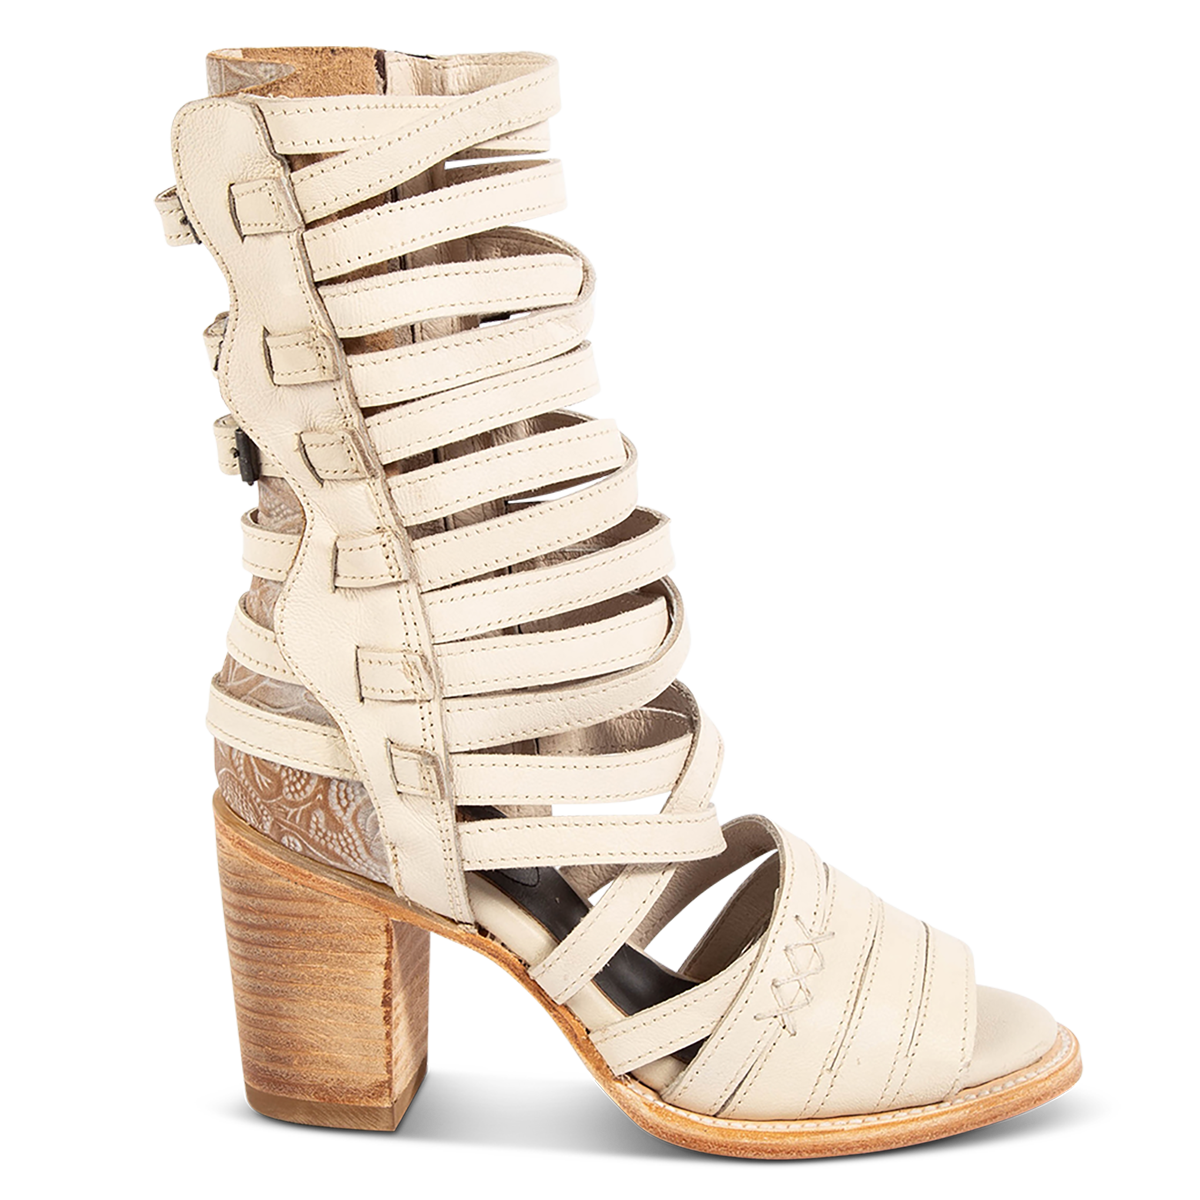 FREEBIRD women's Makayla beige leather sandal with adjustable back paneling, an inside working zip closure and leather straps